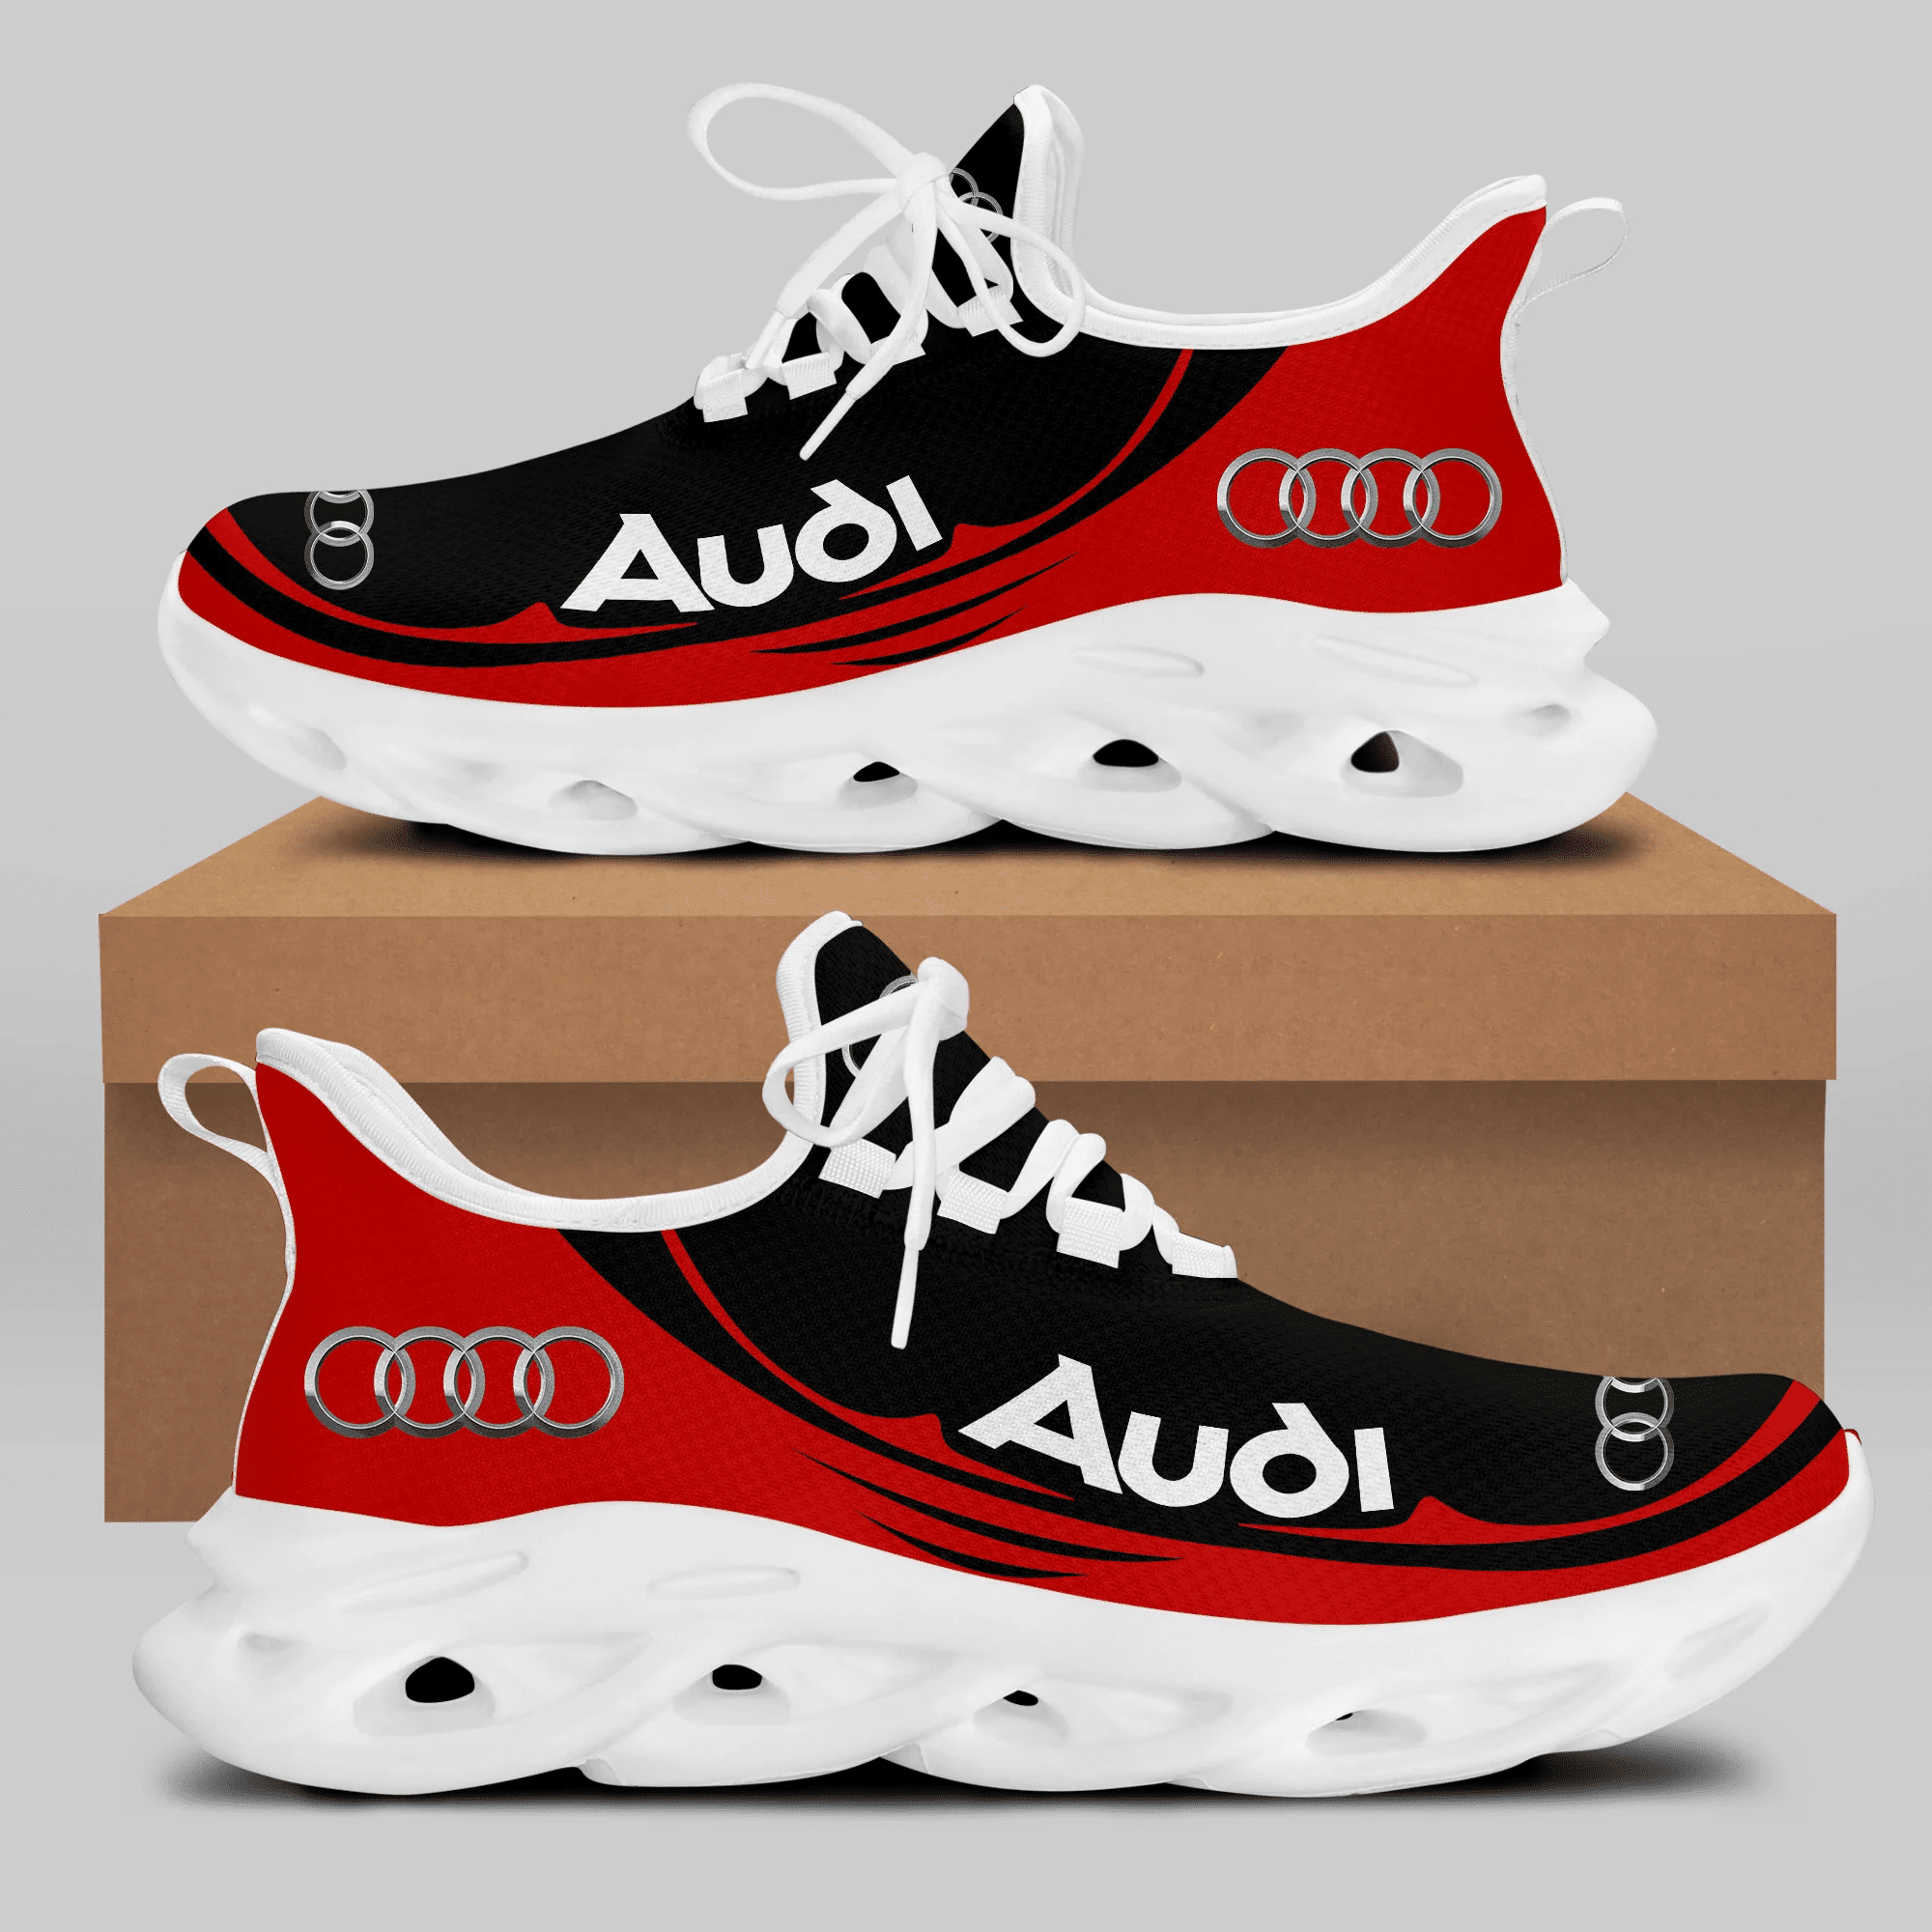 Audi Sport Running Shoes Max Soul Shoes Sneakers Ver 43 2